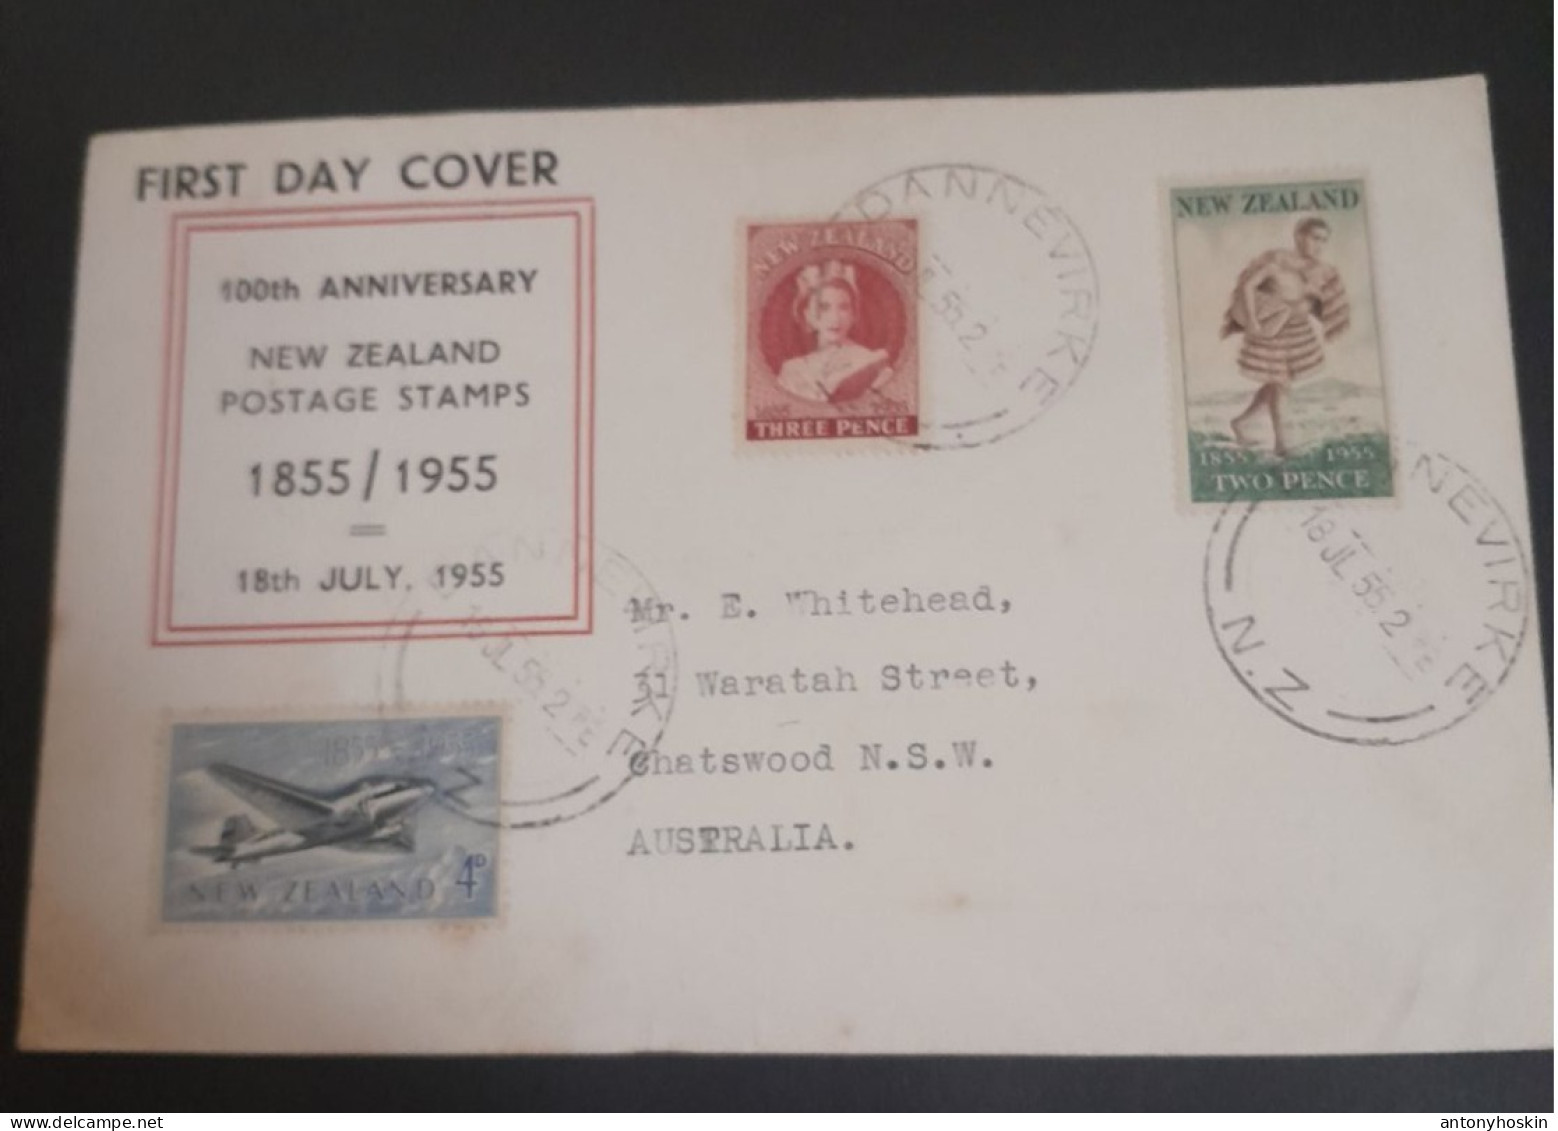 1855-1955 New Zealand Postage Stamps 100 Th Anniversary First Day Cover. - Lettres & Documents